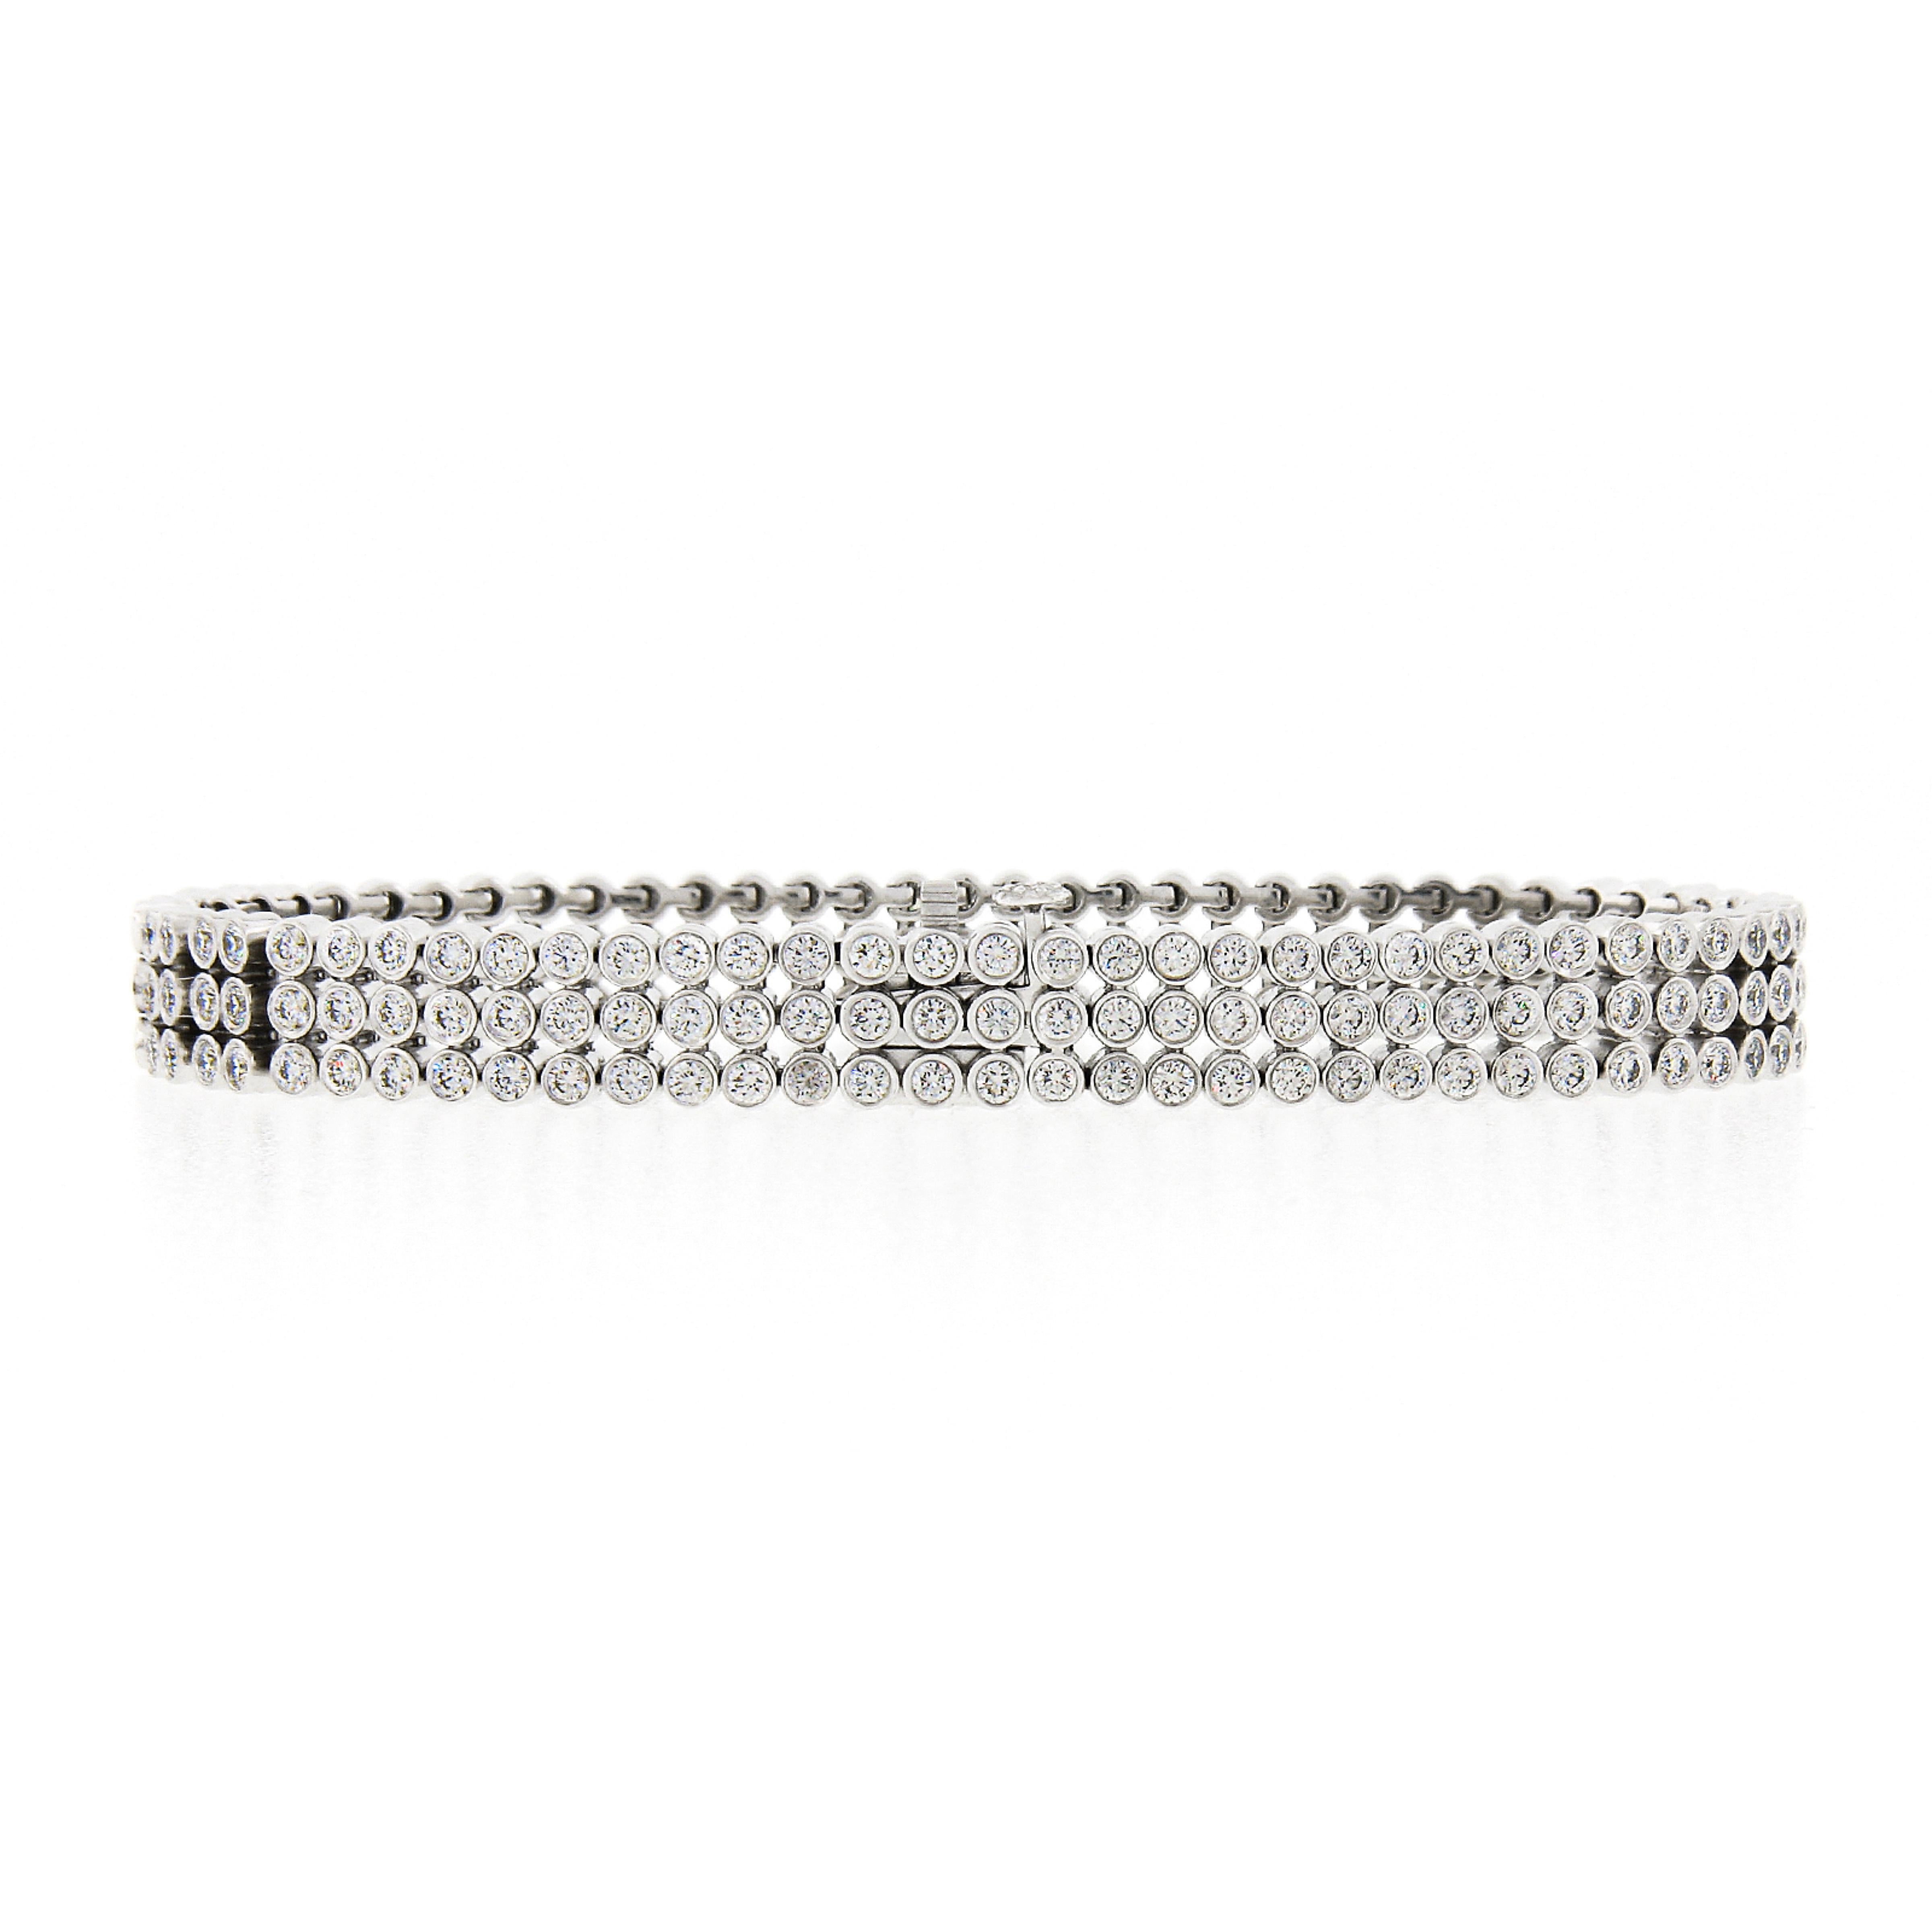 This is a truly breathtaking, fancy, diamond bracelet by Tiffany & Co. that is crafted in solid platinum and features a 3 row design that is neatly bezel set with 204 fiery diamonds throughout. This stunning bracelet comes from the Jazz Collection.